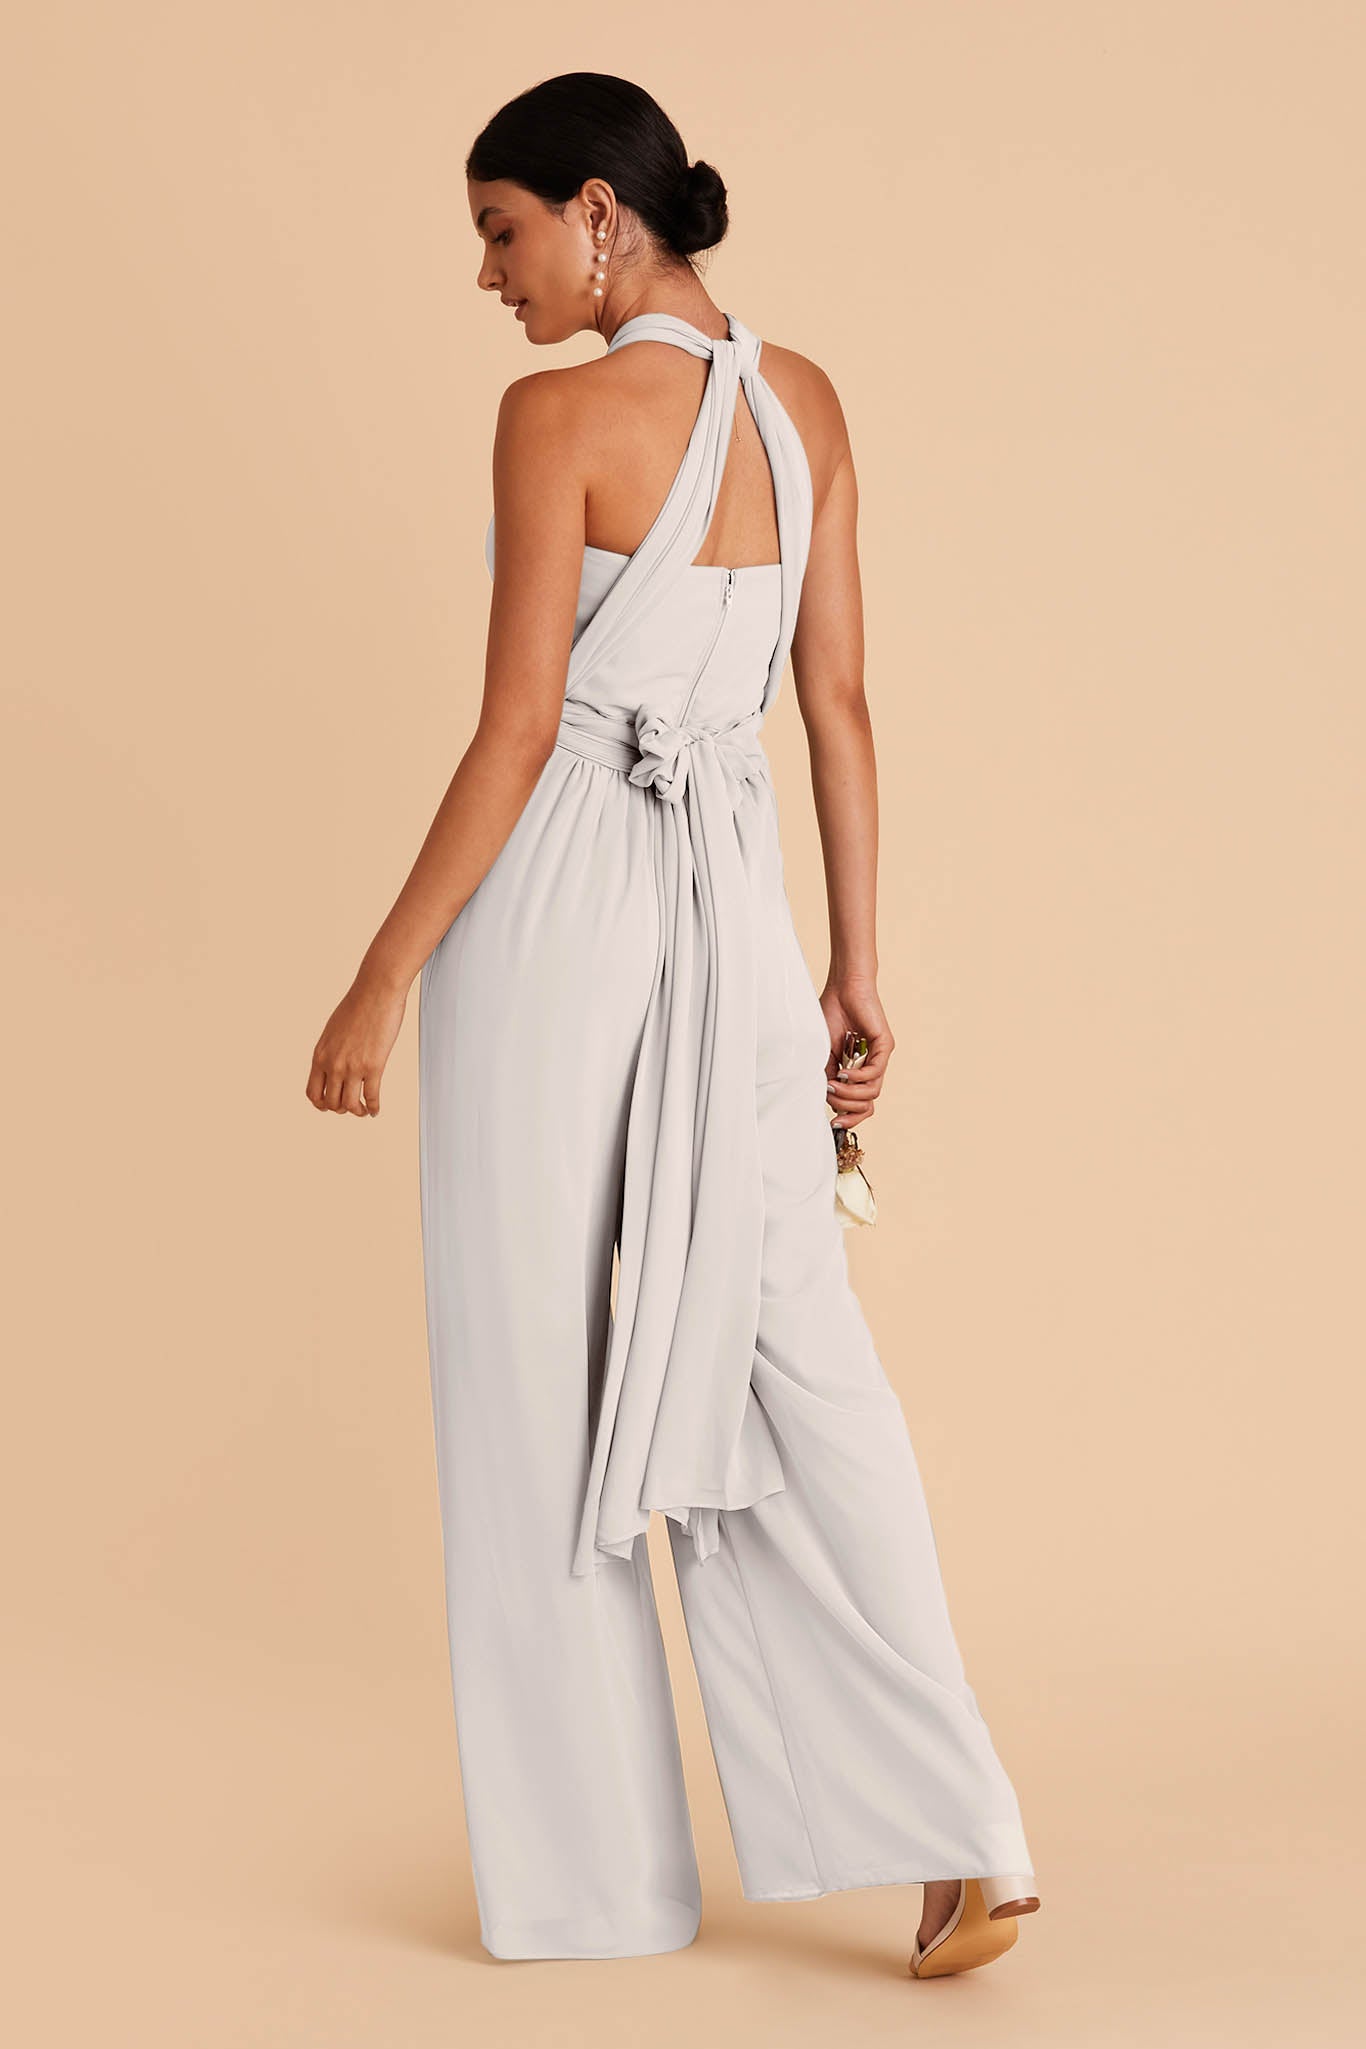 Light gray wedding jumpsuit with sweetheart bodice with convertible neckline with tie in the back